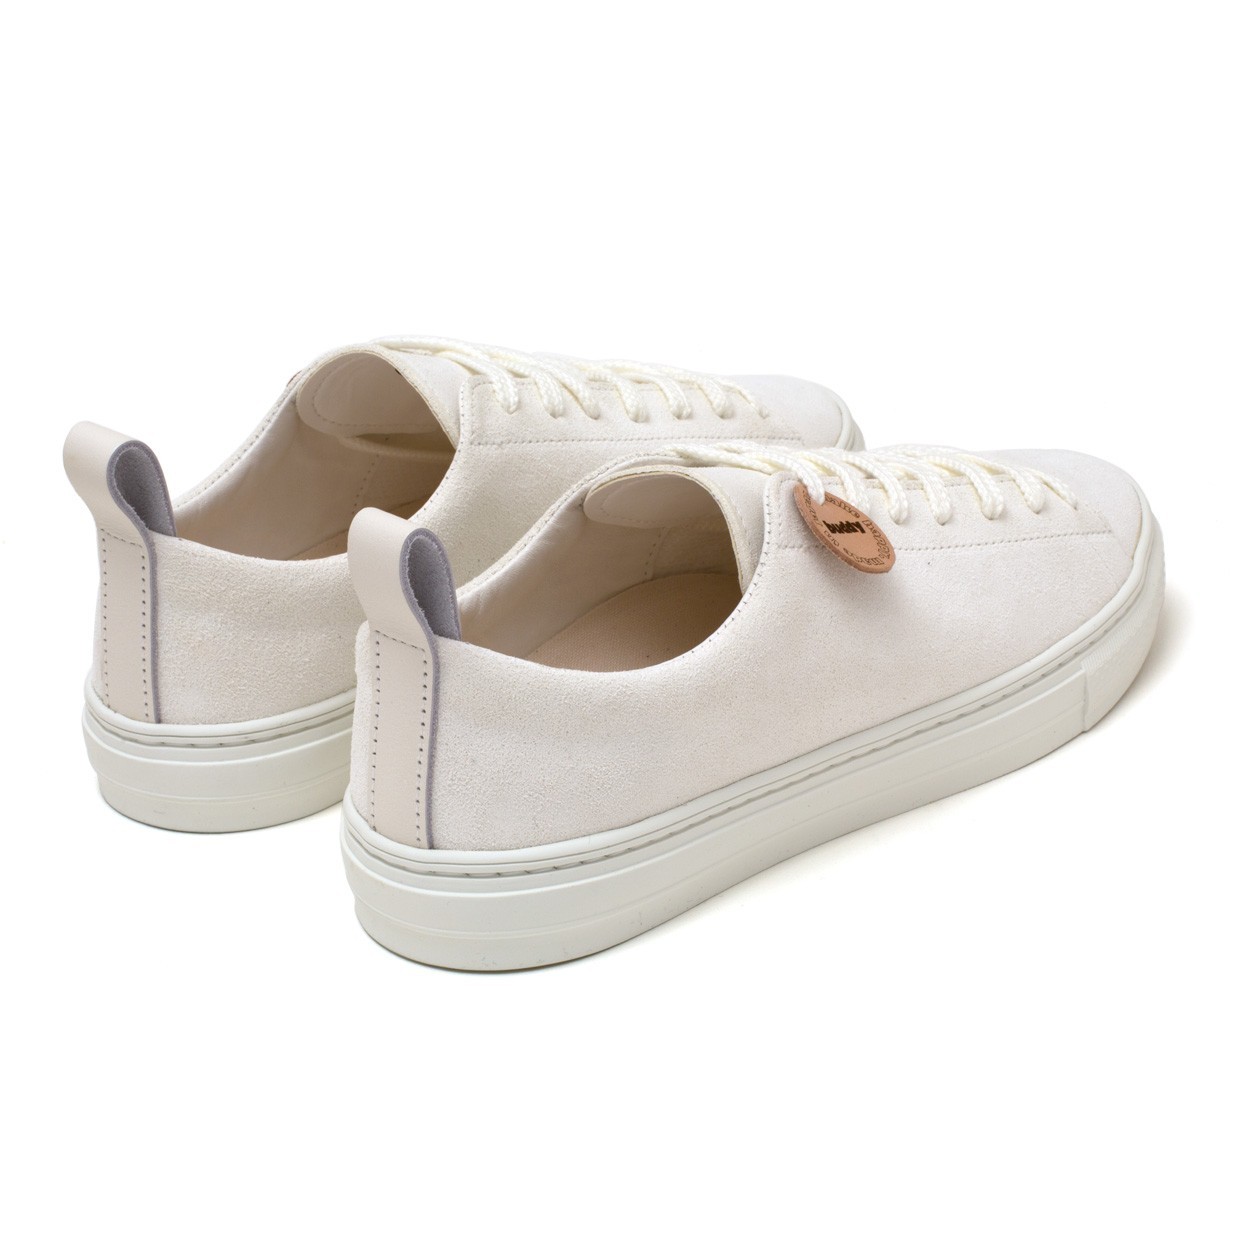 Bull Terrier Low Chubby White Suede